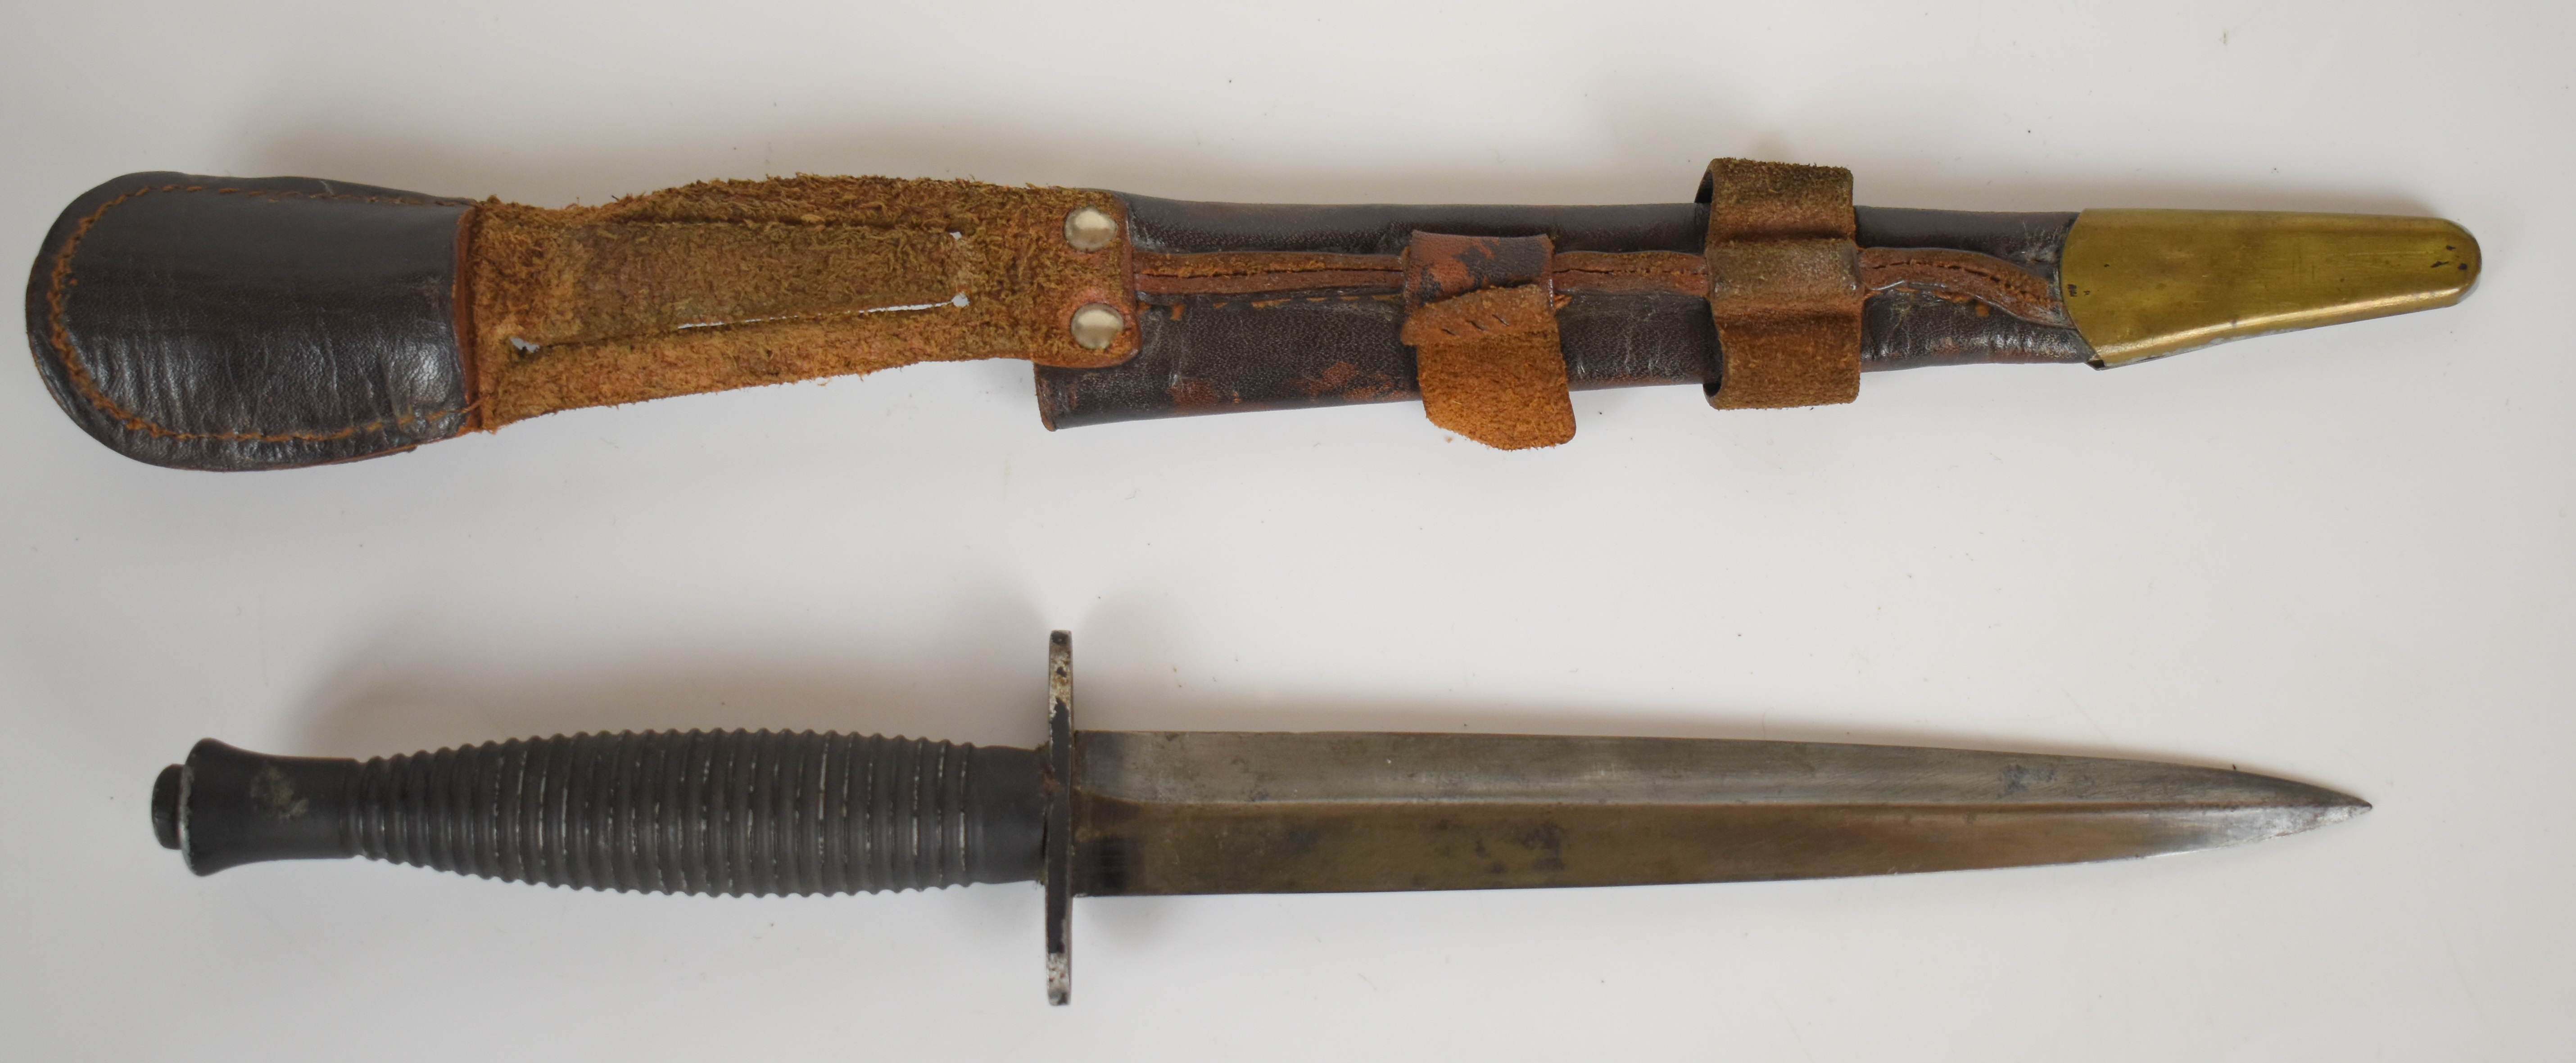 British WW2 Fairbairn Sykes 3rd pattern fighting knife stamped with broad arrow mark and B2, with - Image 2 of 4